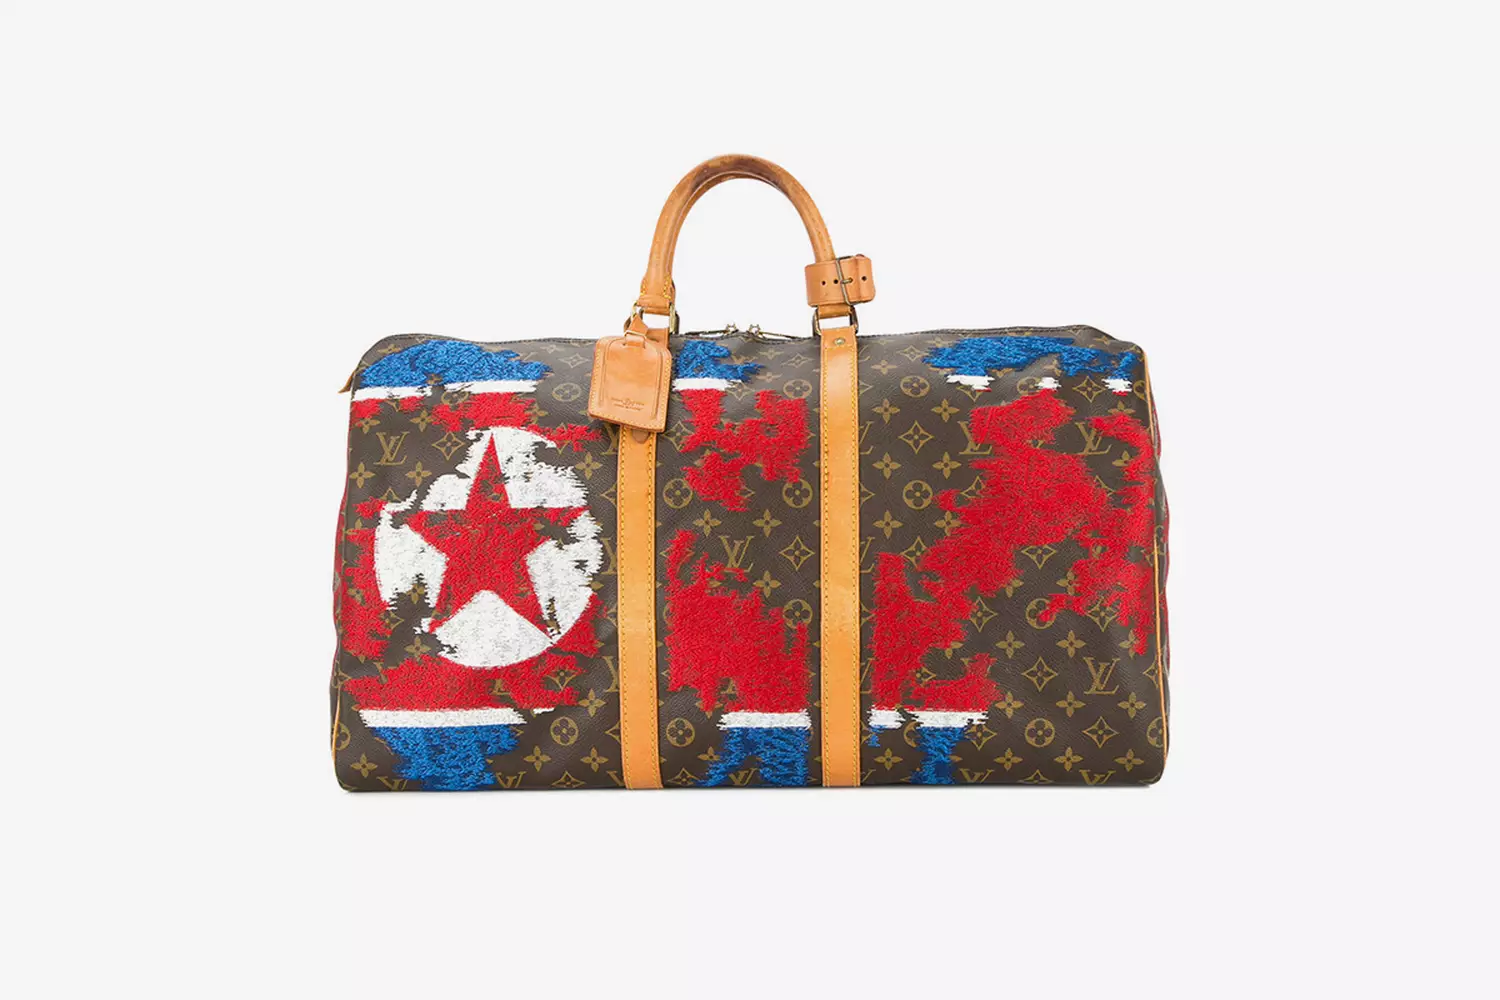 Rama boasted: Louis Vuitton sells bags with the Albanian flag